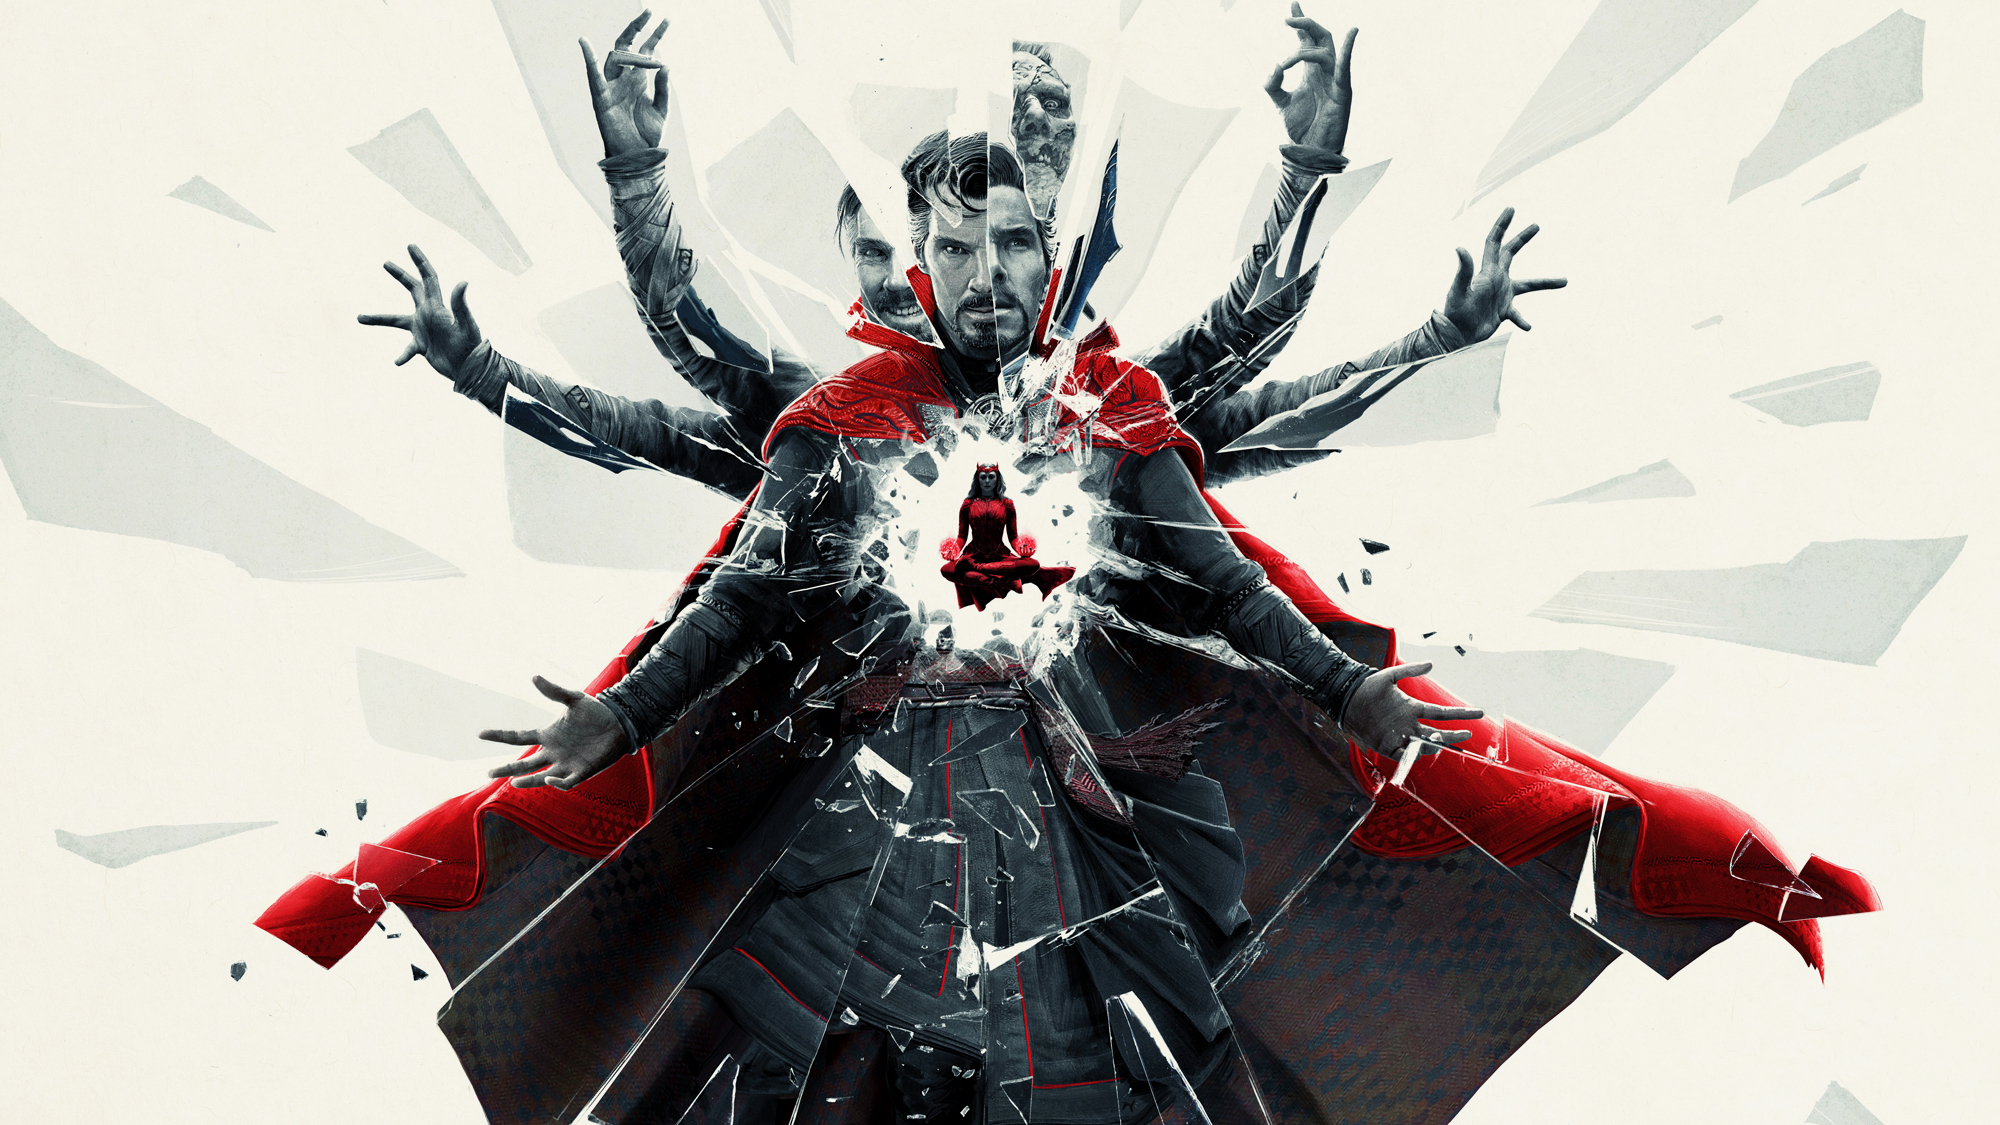 Doctor Strange in the Multiverse of Madness HD Wallpaper and Background